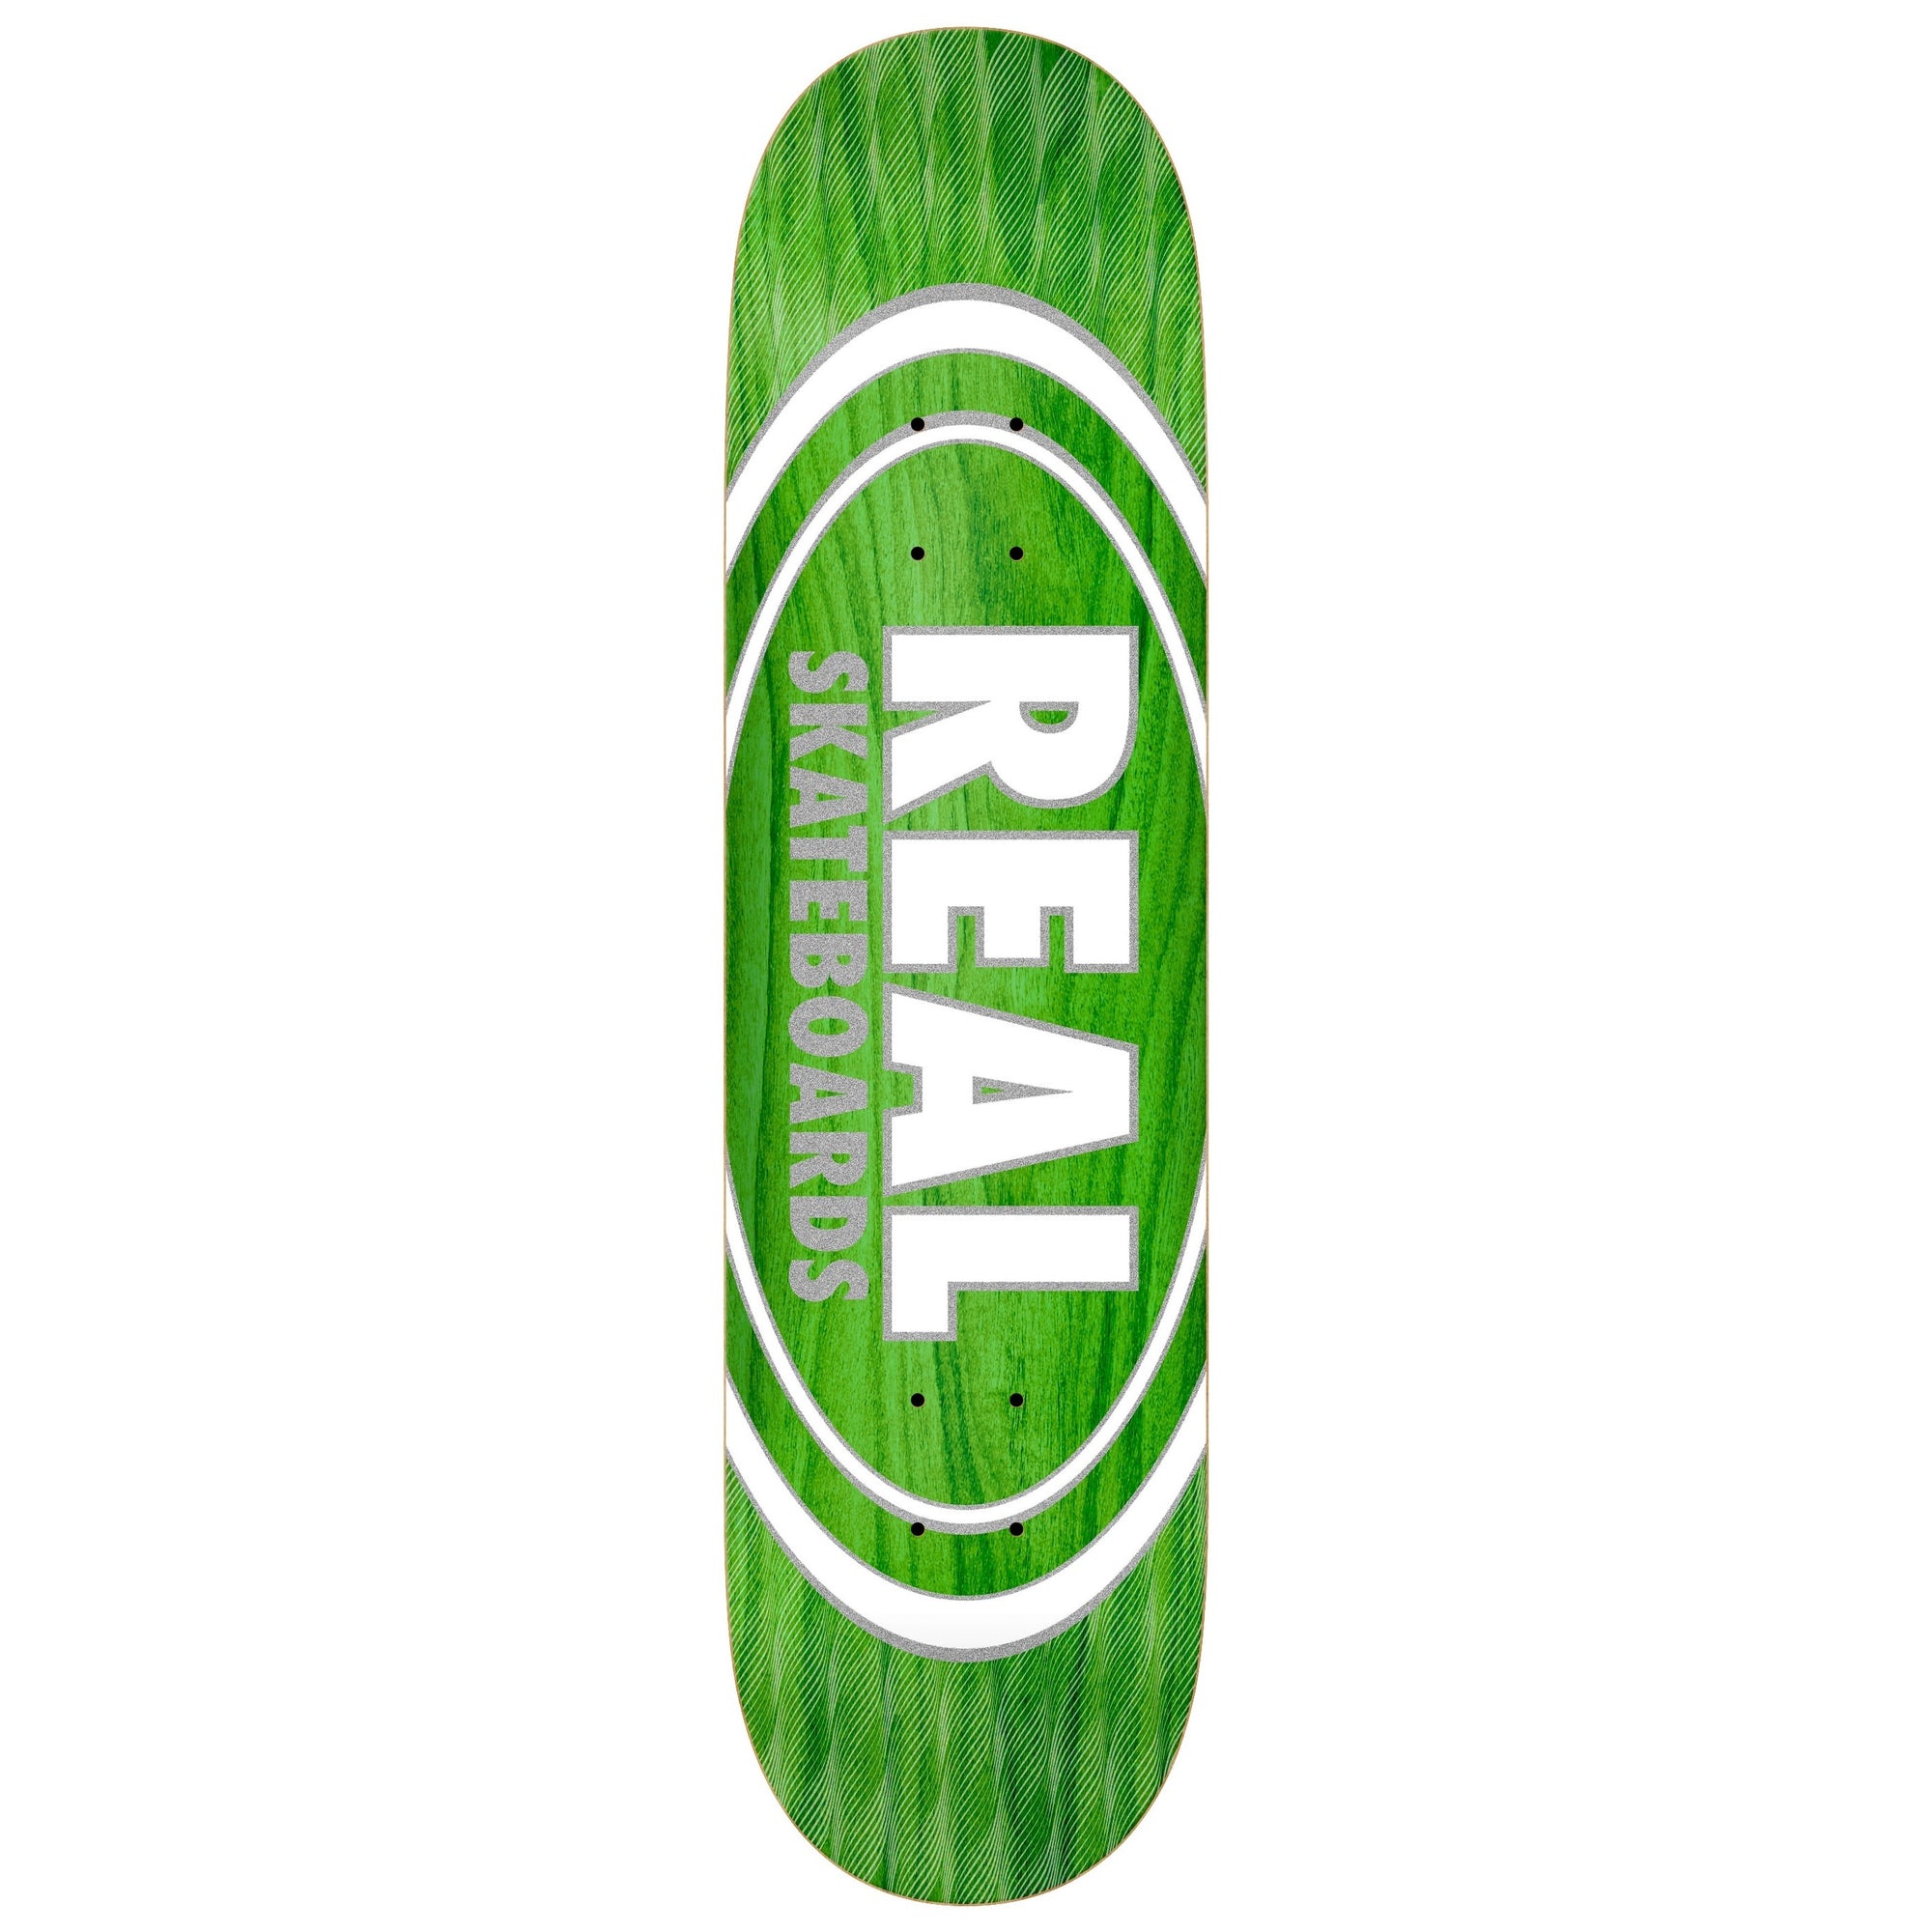 REAL DECK - OVAL PEARL PATTERNS (7.75") - The Drive Skateshop